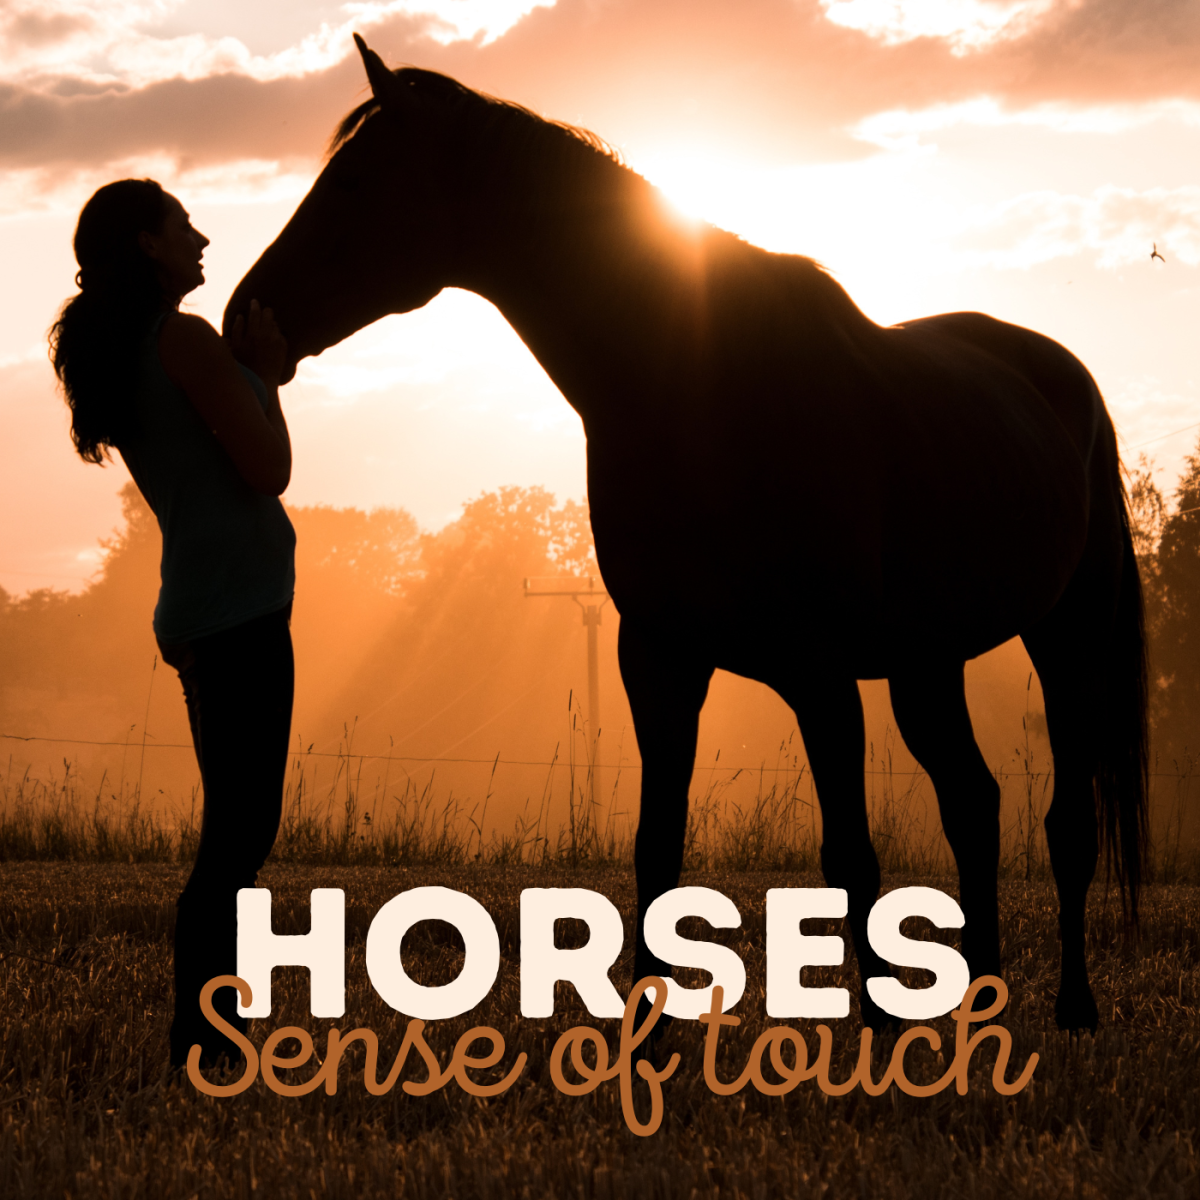 horses-their-ability-to-feel-and-their-sense-of-touch